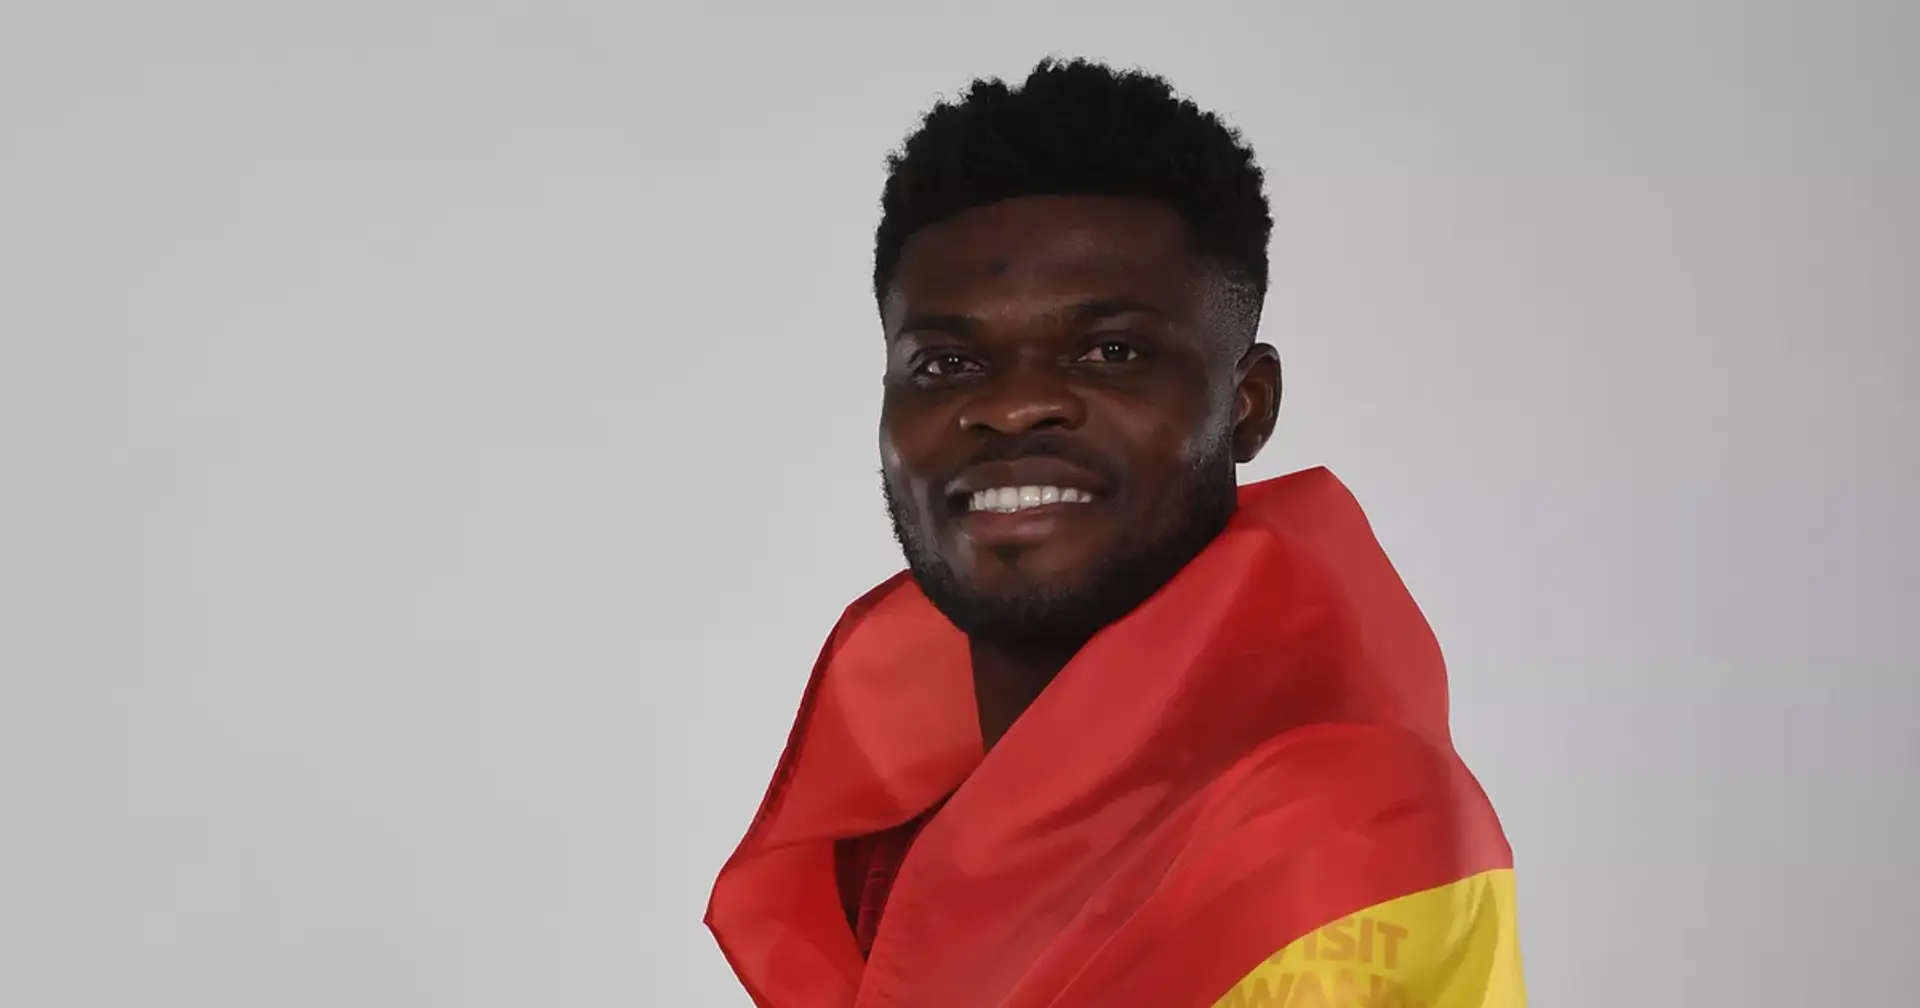 'Ghana is like a family. You can't leave your family': Partey on how he supports his homeland